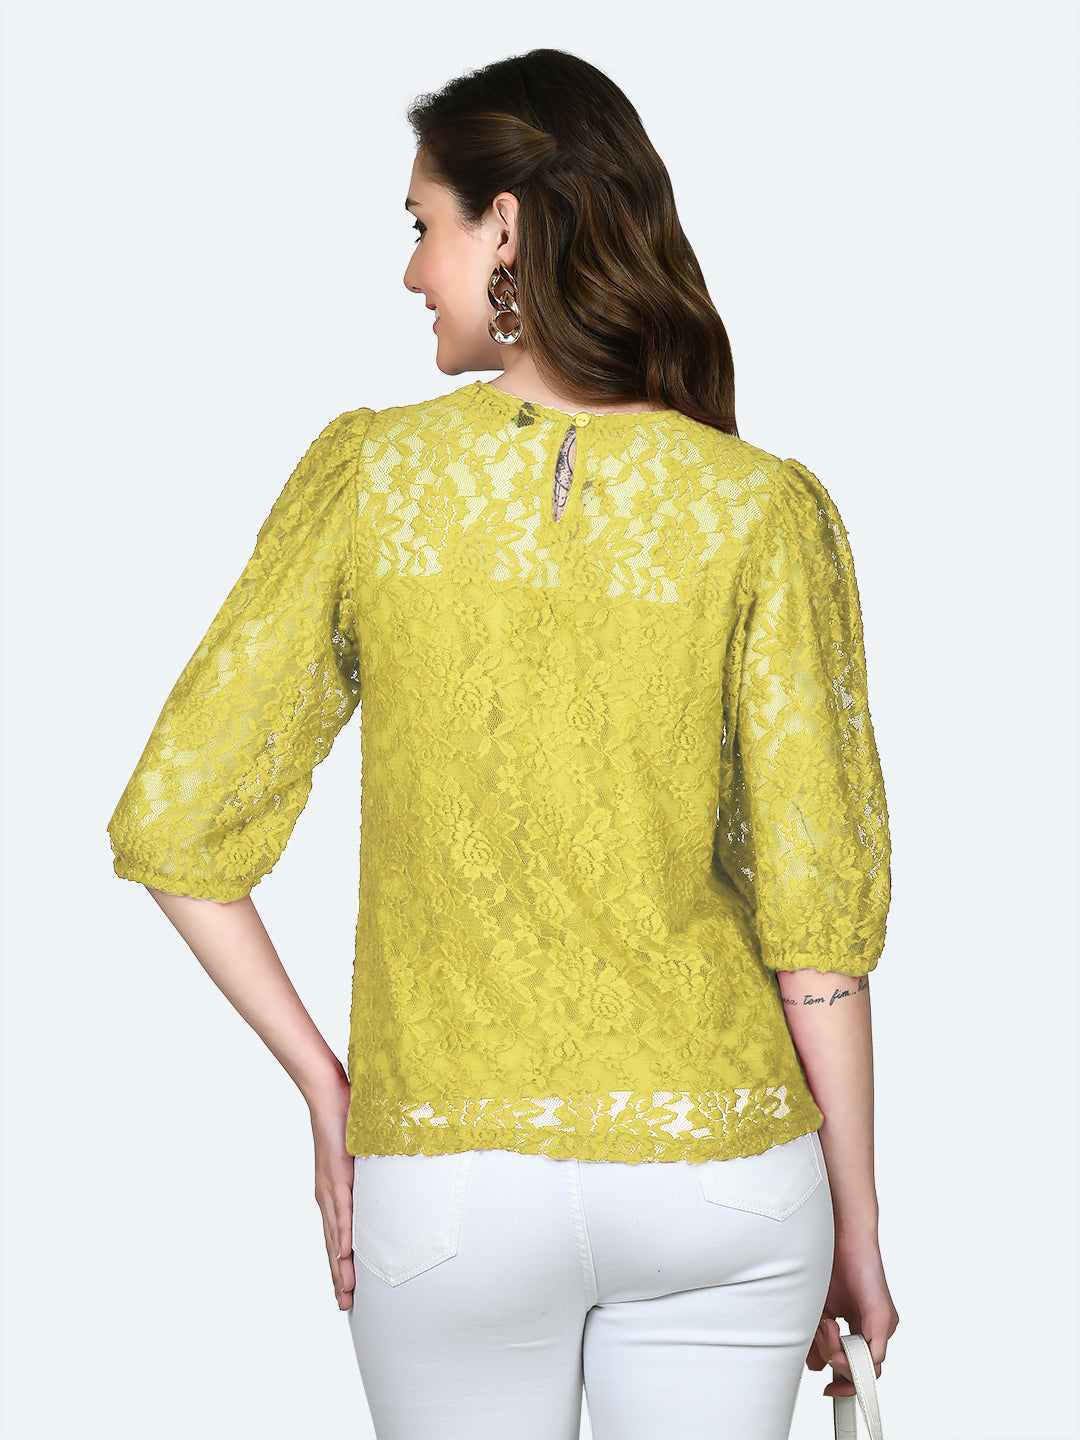 Yellow-Lace-Round-Neck-Top-VT05062_113-Yellow-4